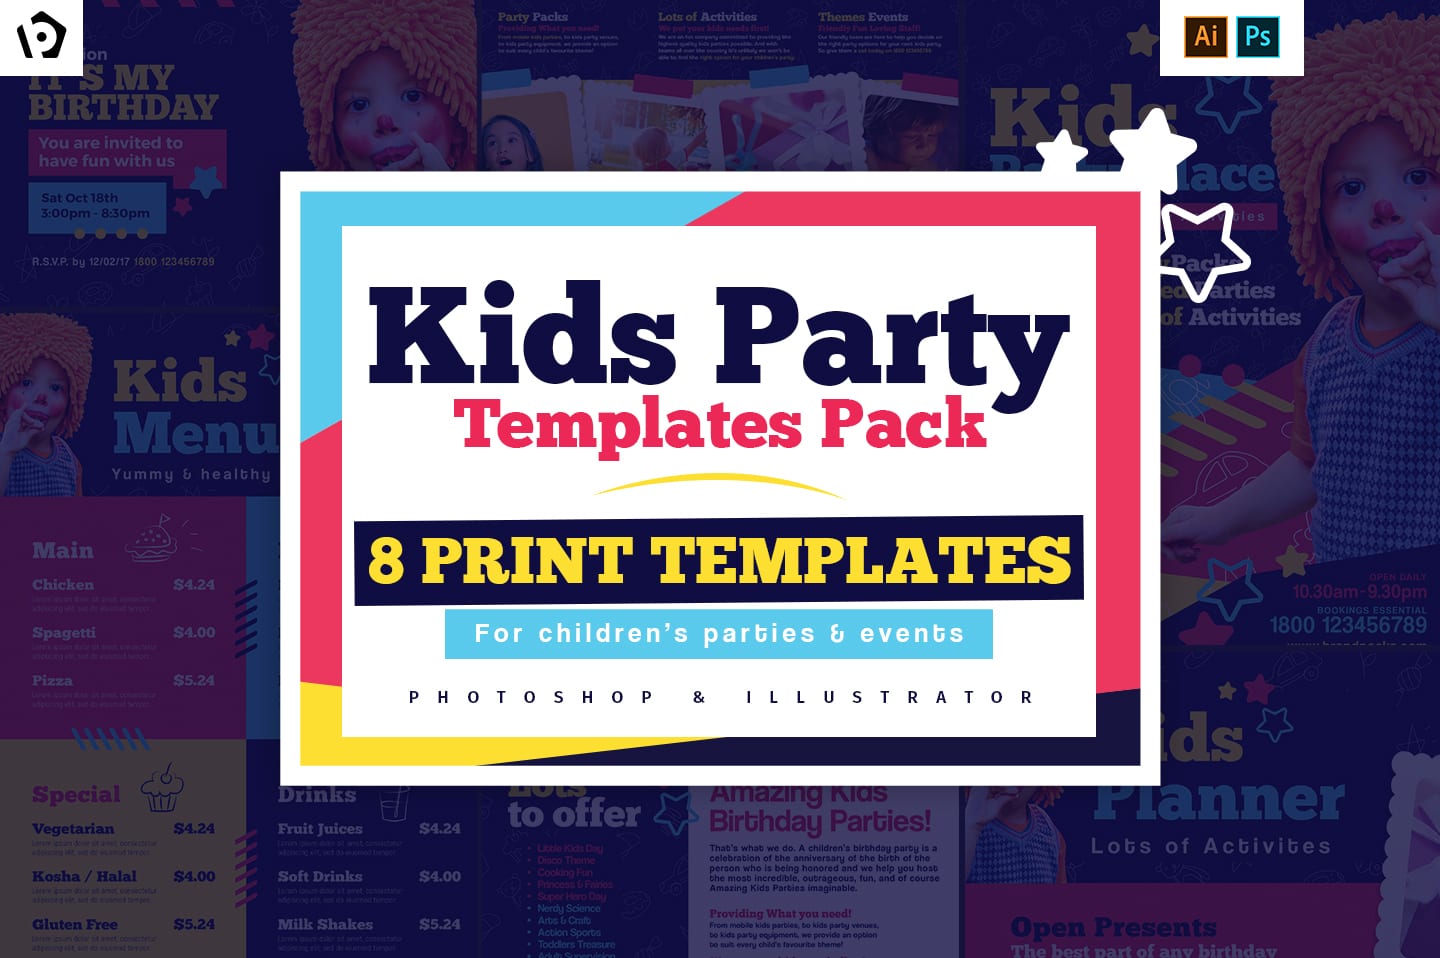 Kid's Party Templates Pack